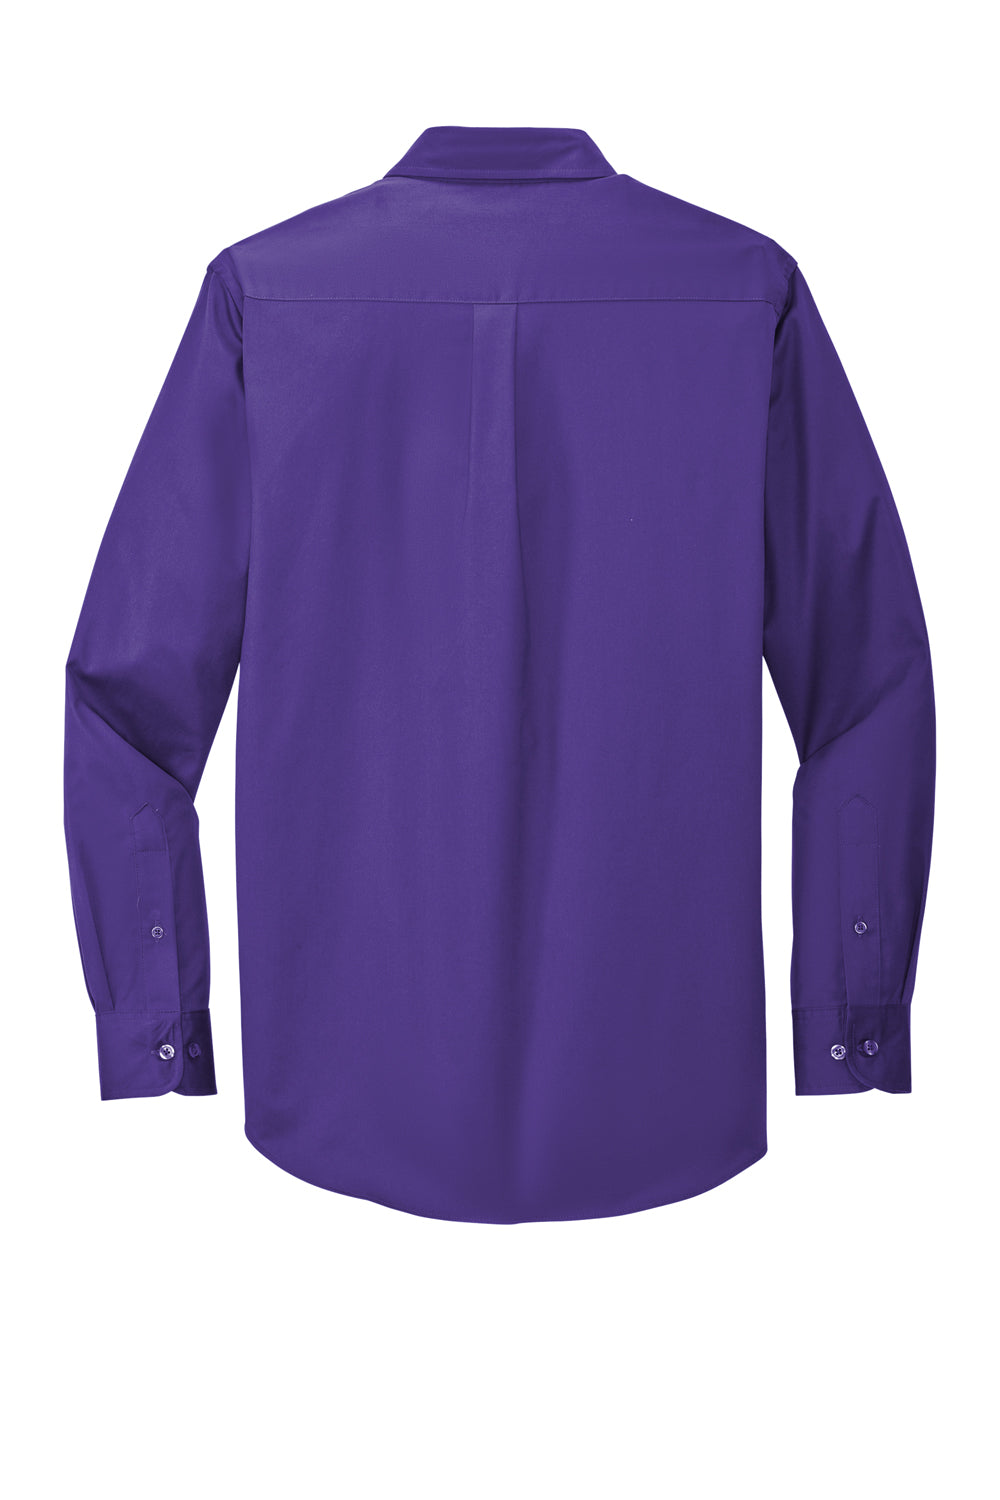 Port Authority S608/TLS608/S608ES Mens Easy Care Wrinkle Resistant Long Sleeve Button Down Shirt w/ Pocket Purple Flat Back